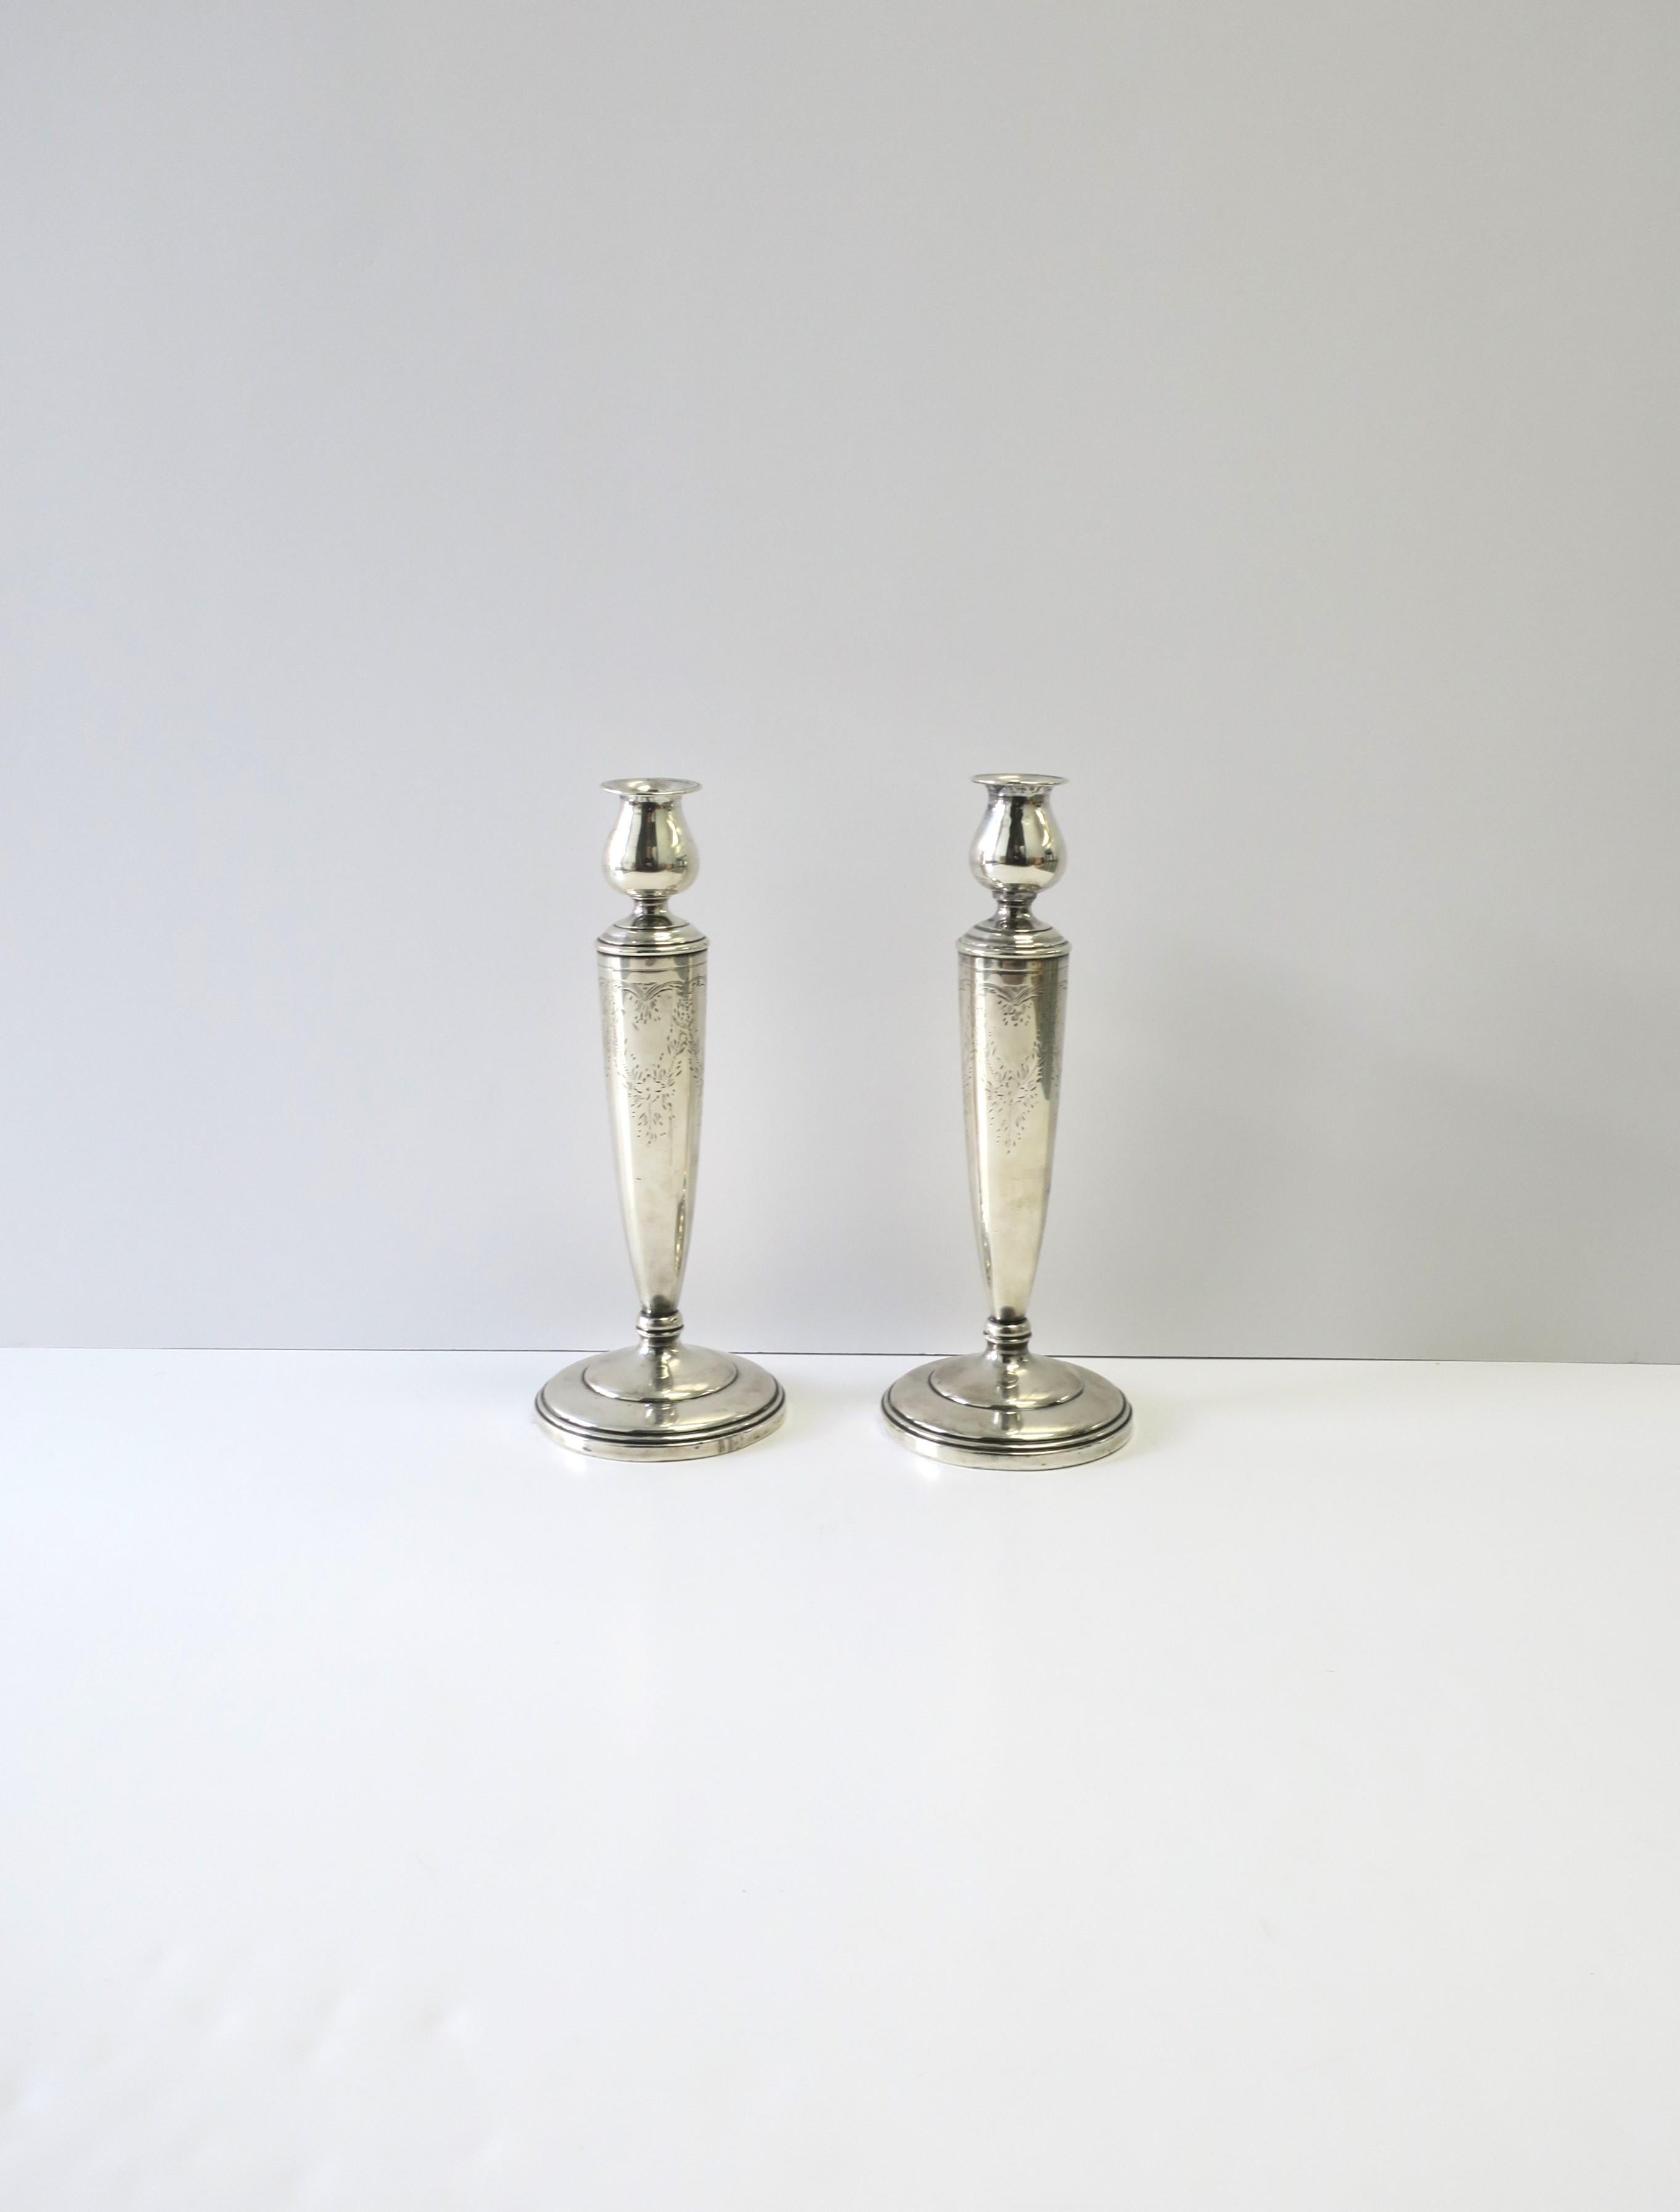 A pair of European sterling silver candlestick holders with decorative etched design, circa early 20th century, Europe. Marked 'Sterling' on bottom as shown. Measure: 9.63